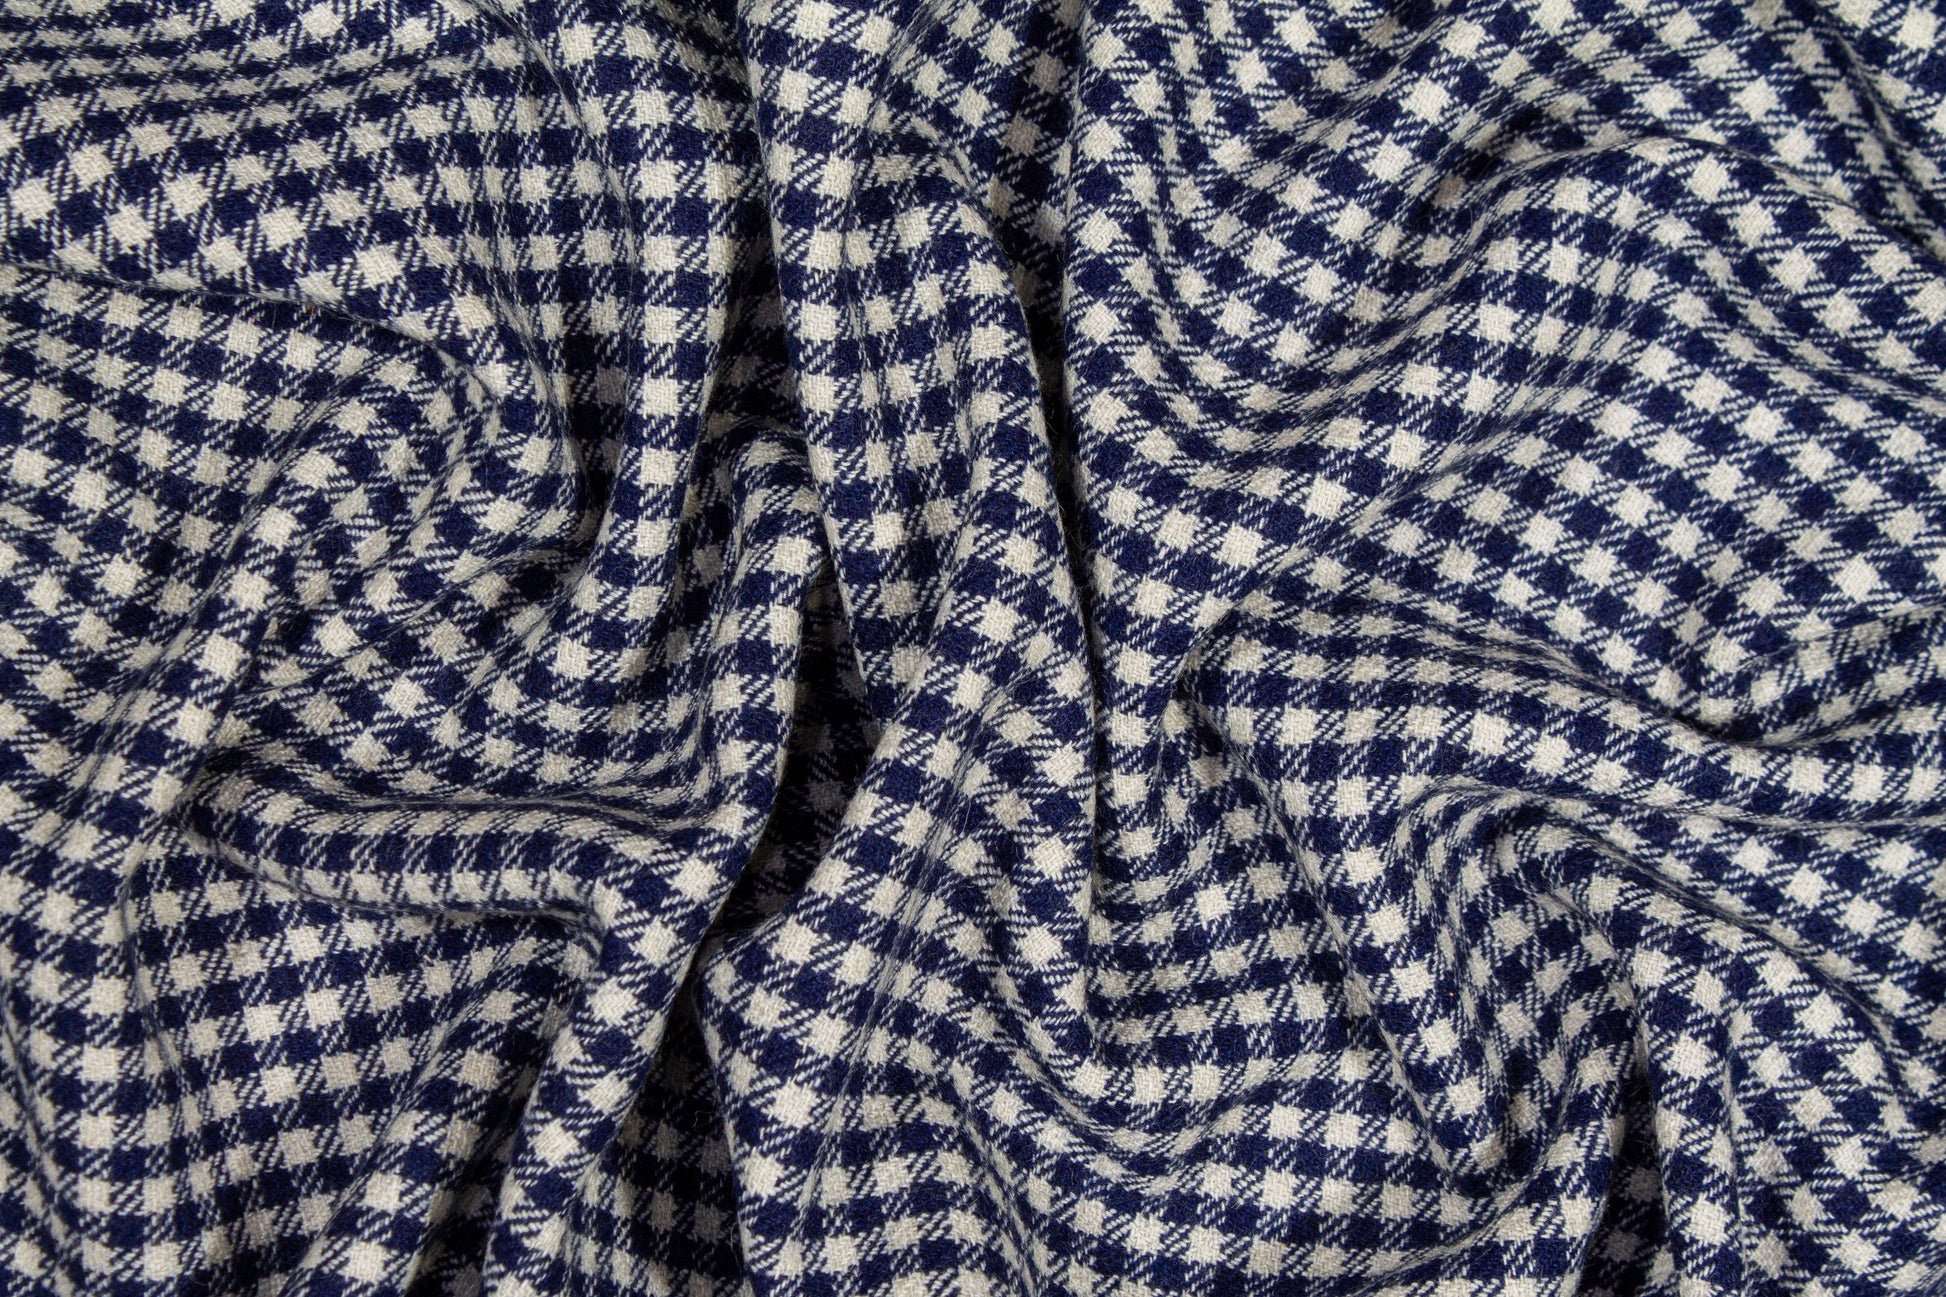 Double Faced Gingham Check Wool Coating - Prime Fabrics